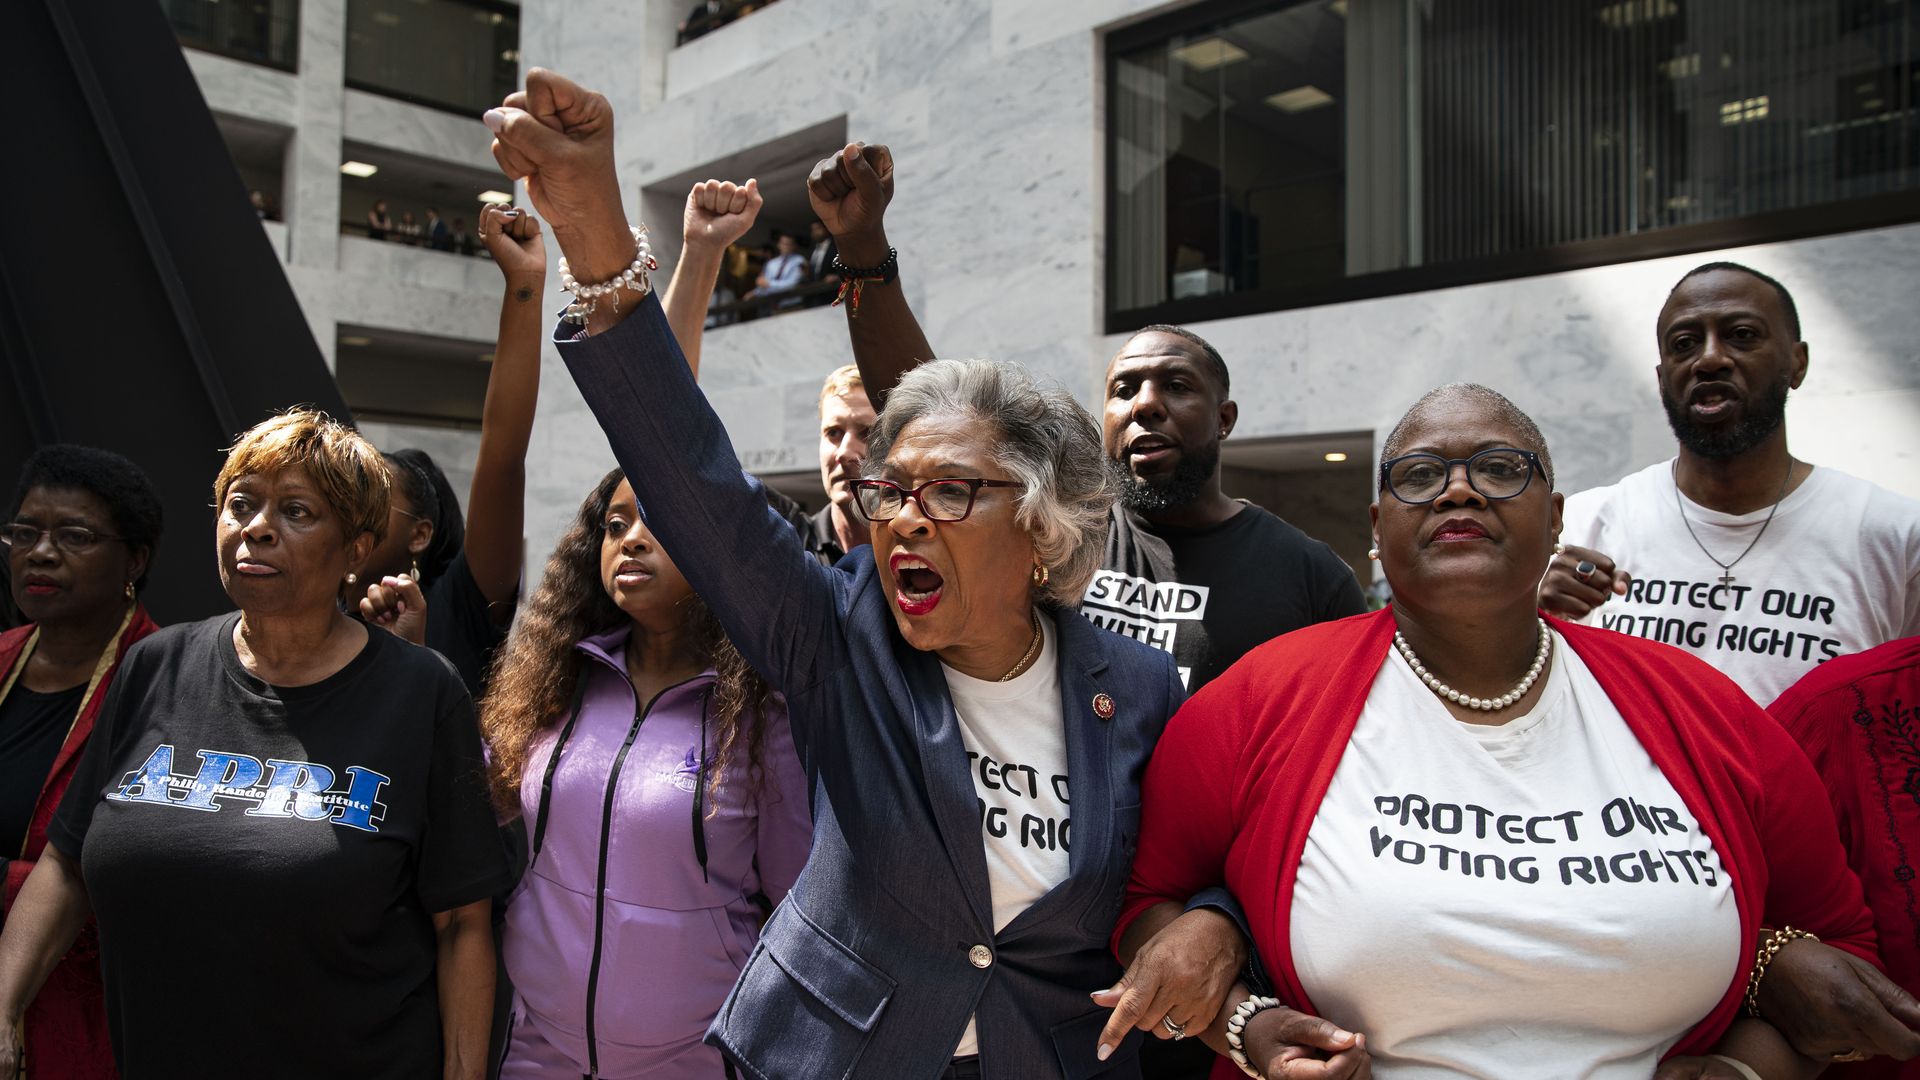 Photo of Joyce Beatty with one fist in the air and the other linked around another protester as they, joined by several others, protest in the Senate lobby